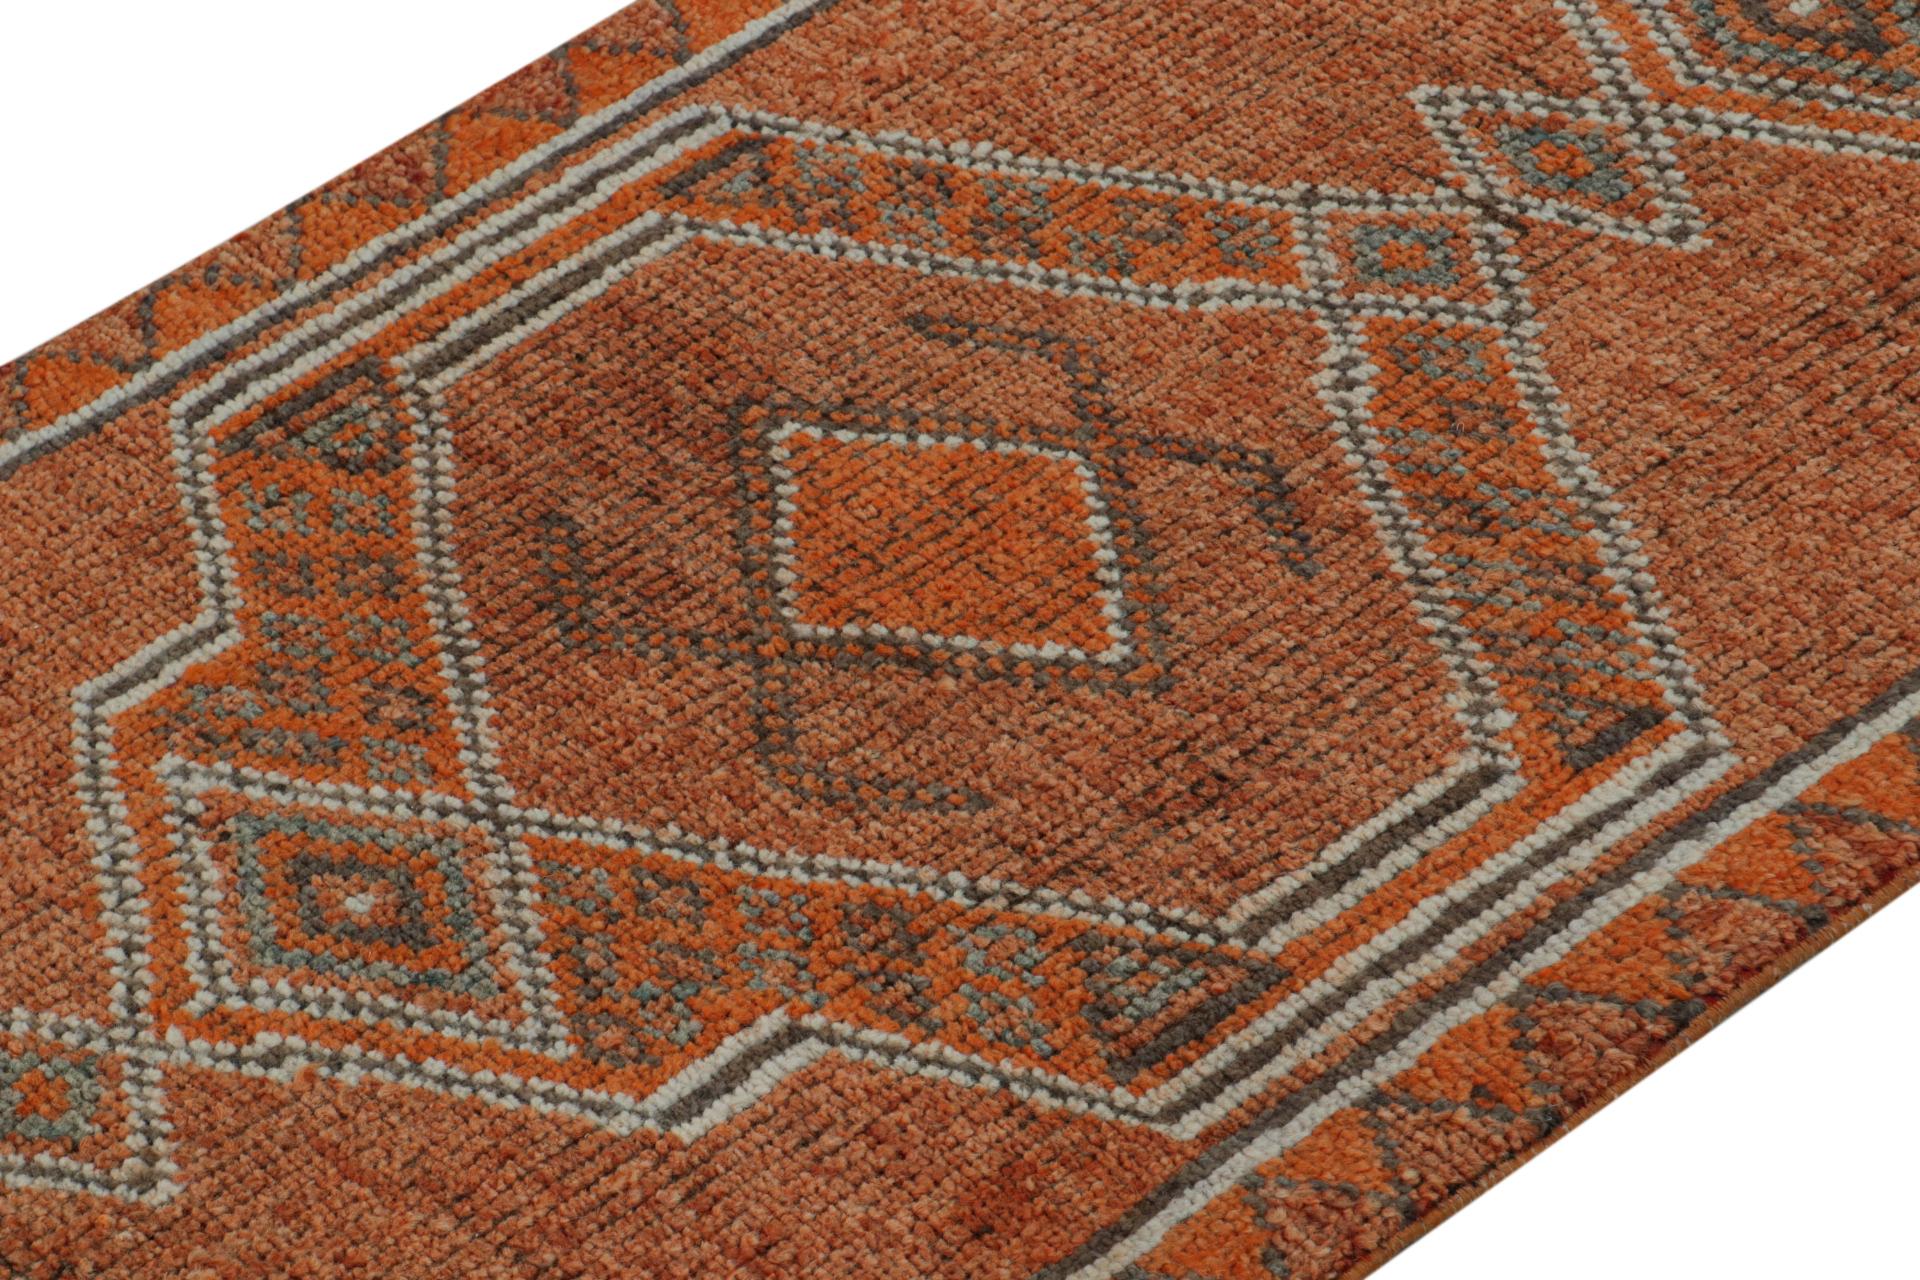 Vintage Persian runner with Orange and White Patterns by Rug & Kilim In Good Condition For Sale In Long Island City, NY